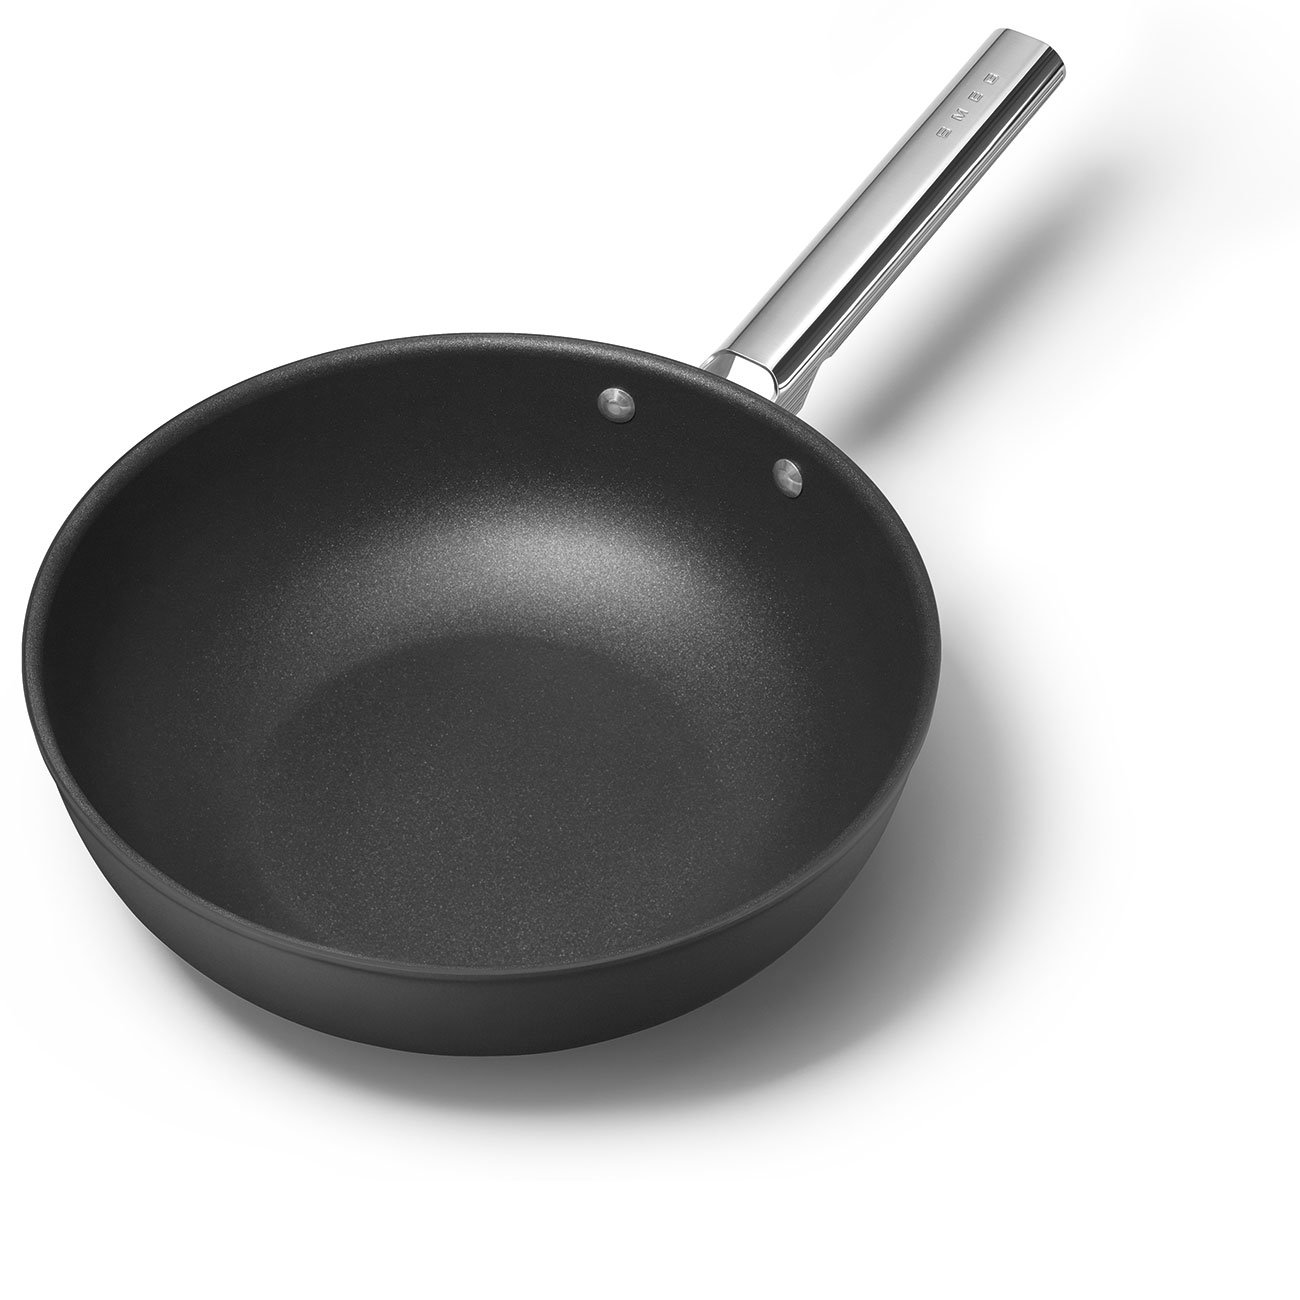 Smeg Black Non-stick Wok with Stainless Steel Handle - CKFW3001BLM_3